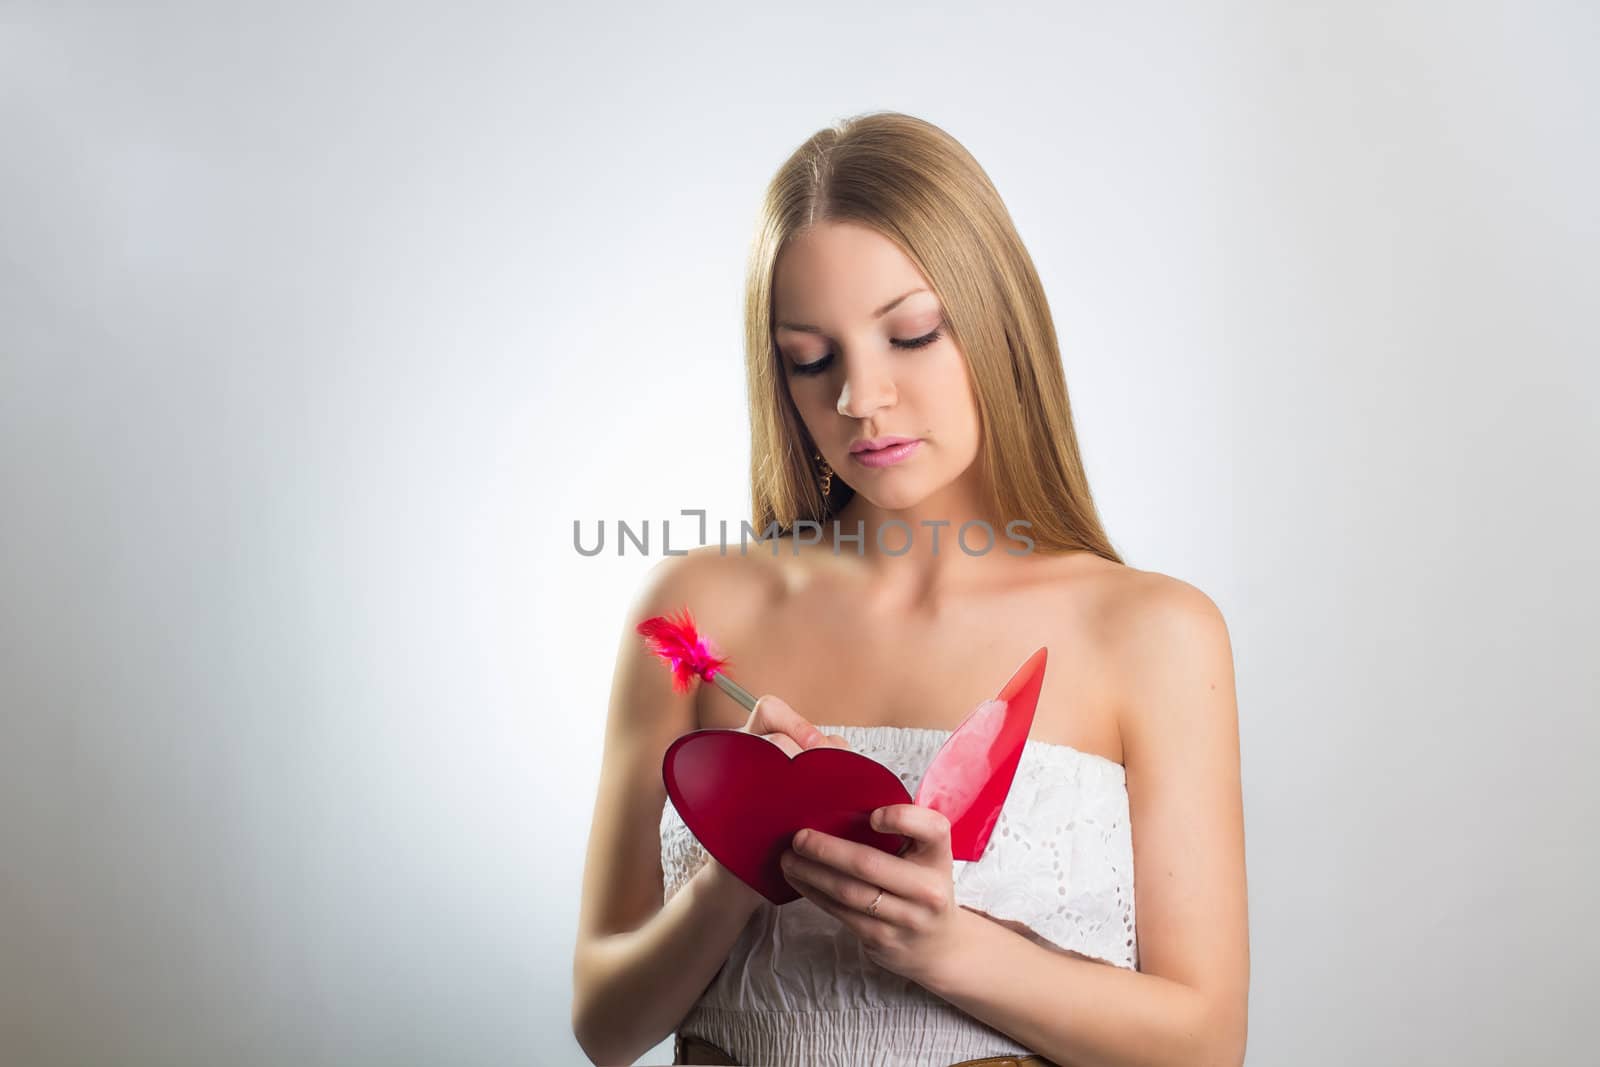 Attractive young woman feeling the love on valantines day 